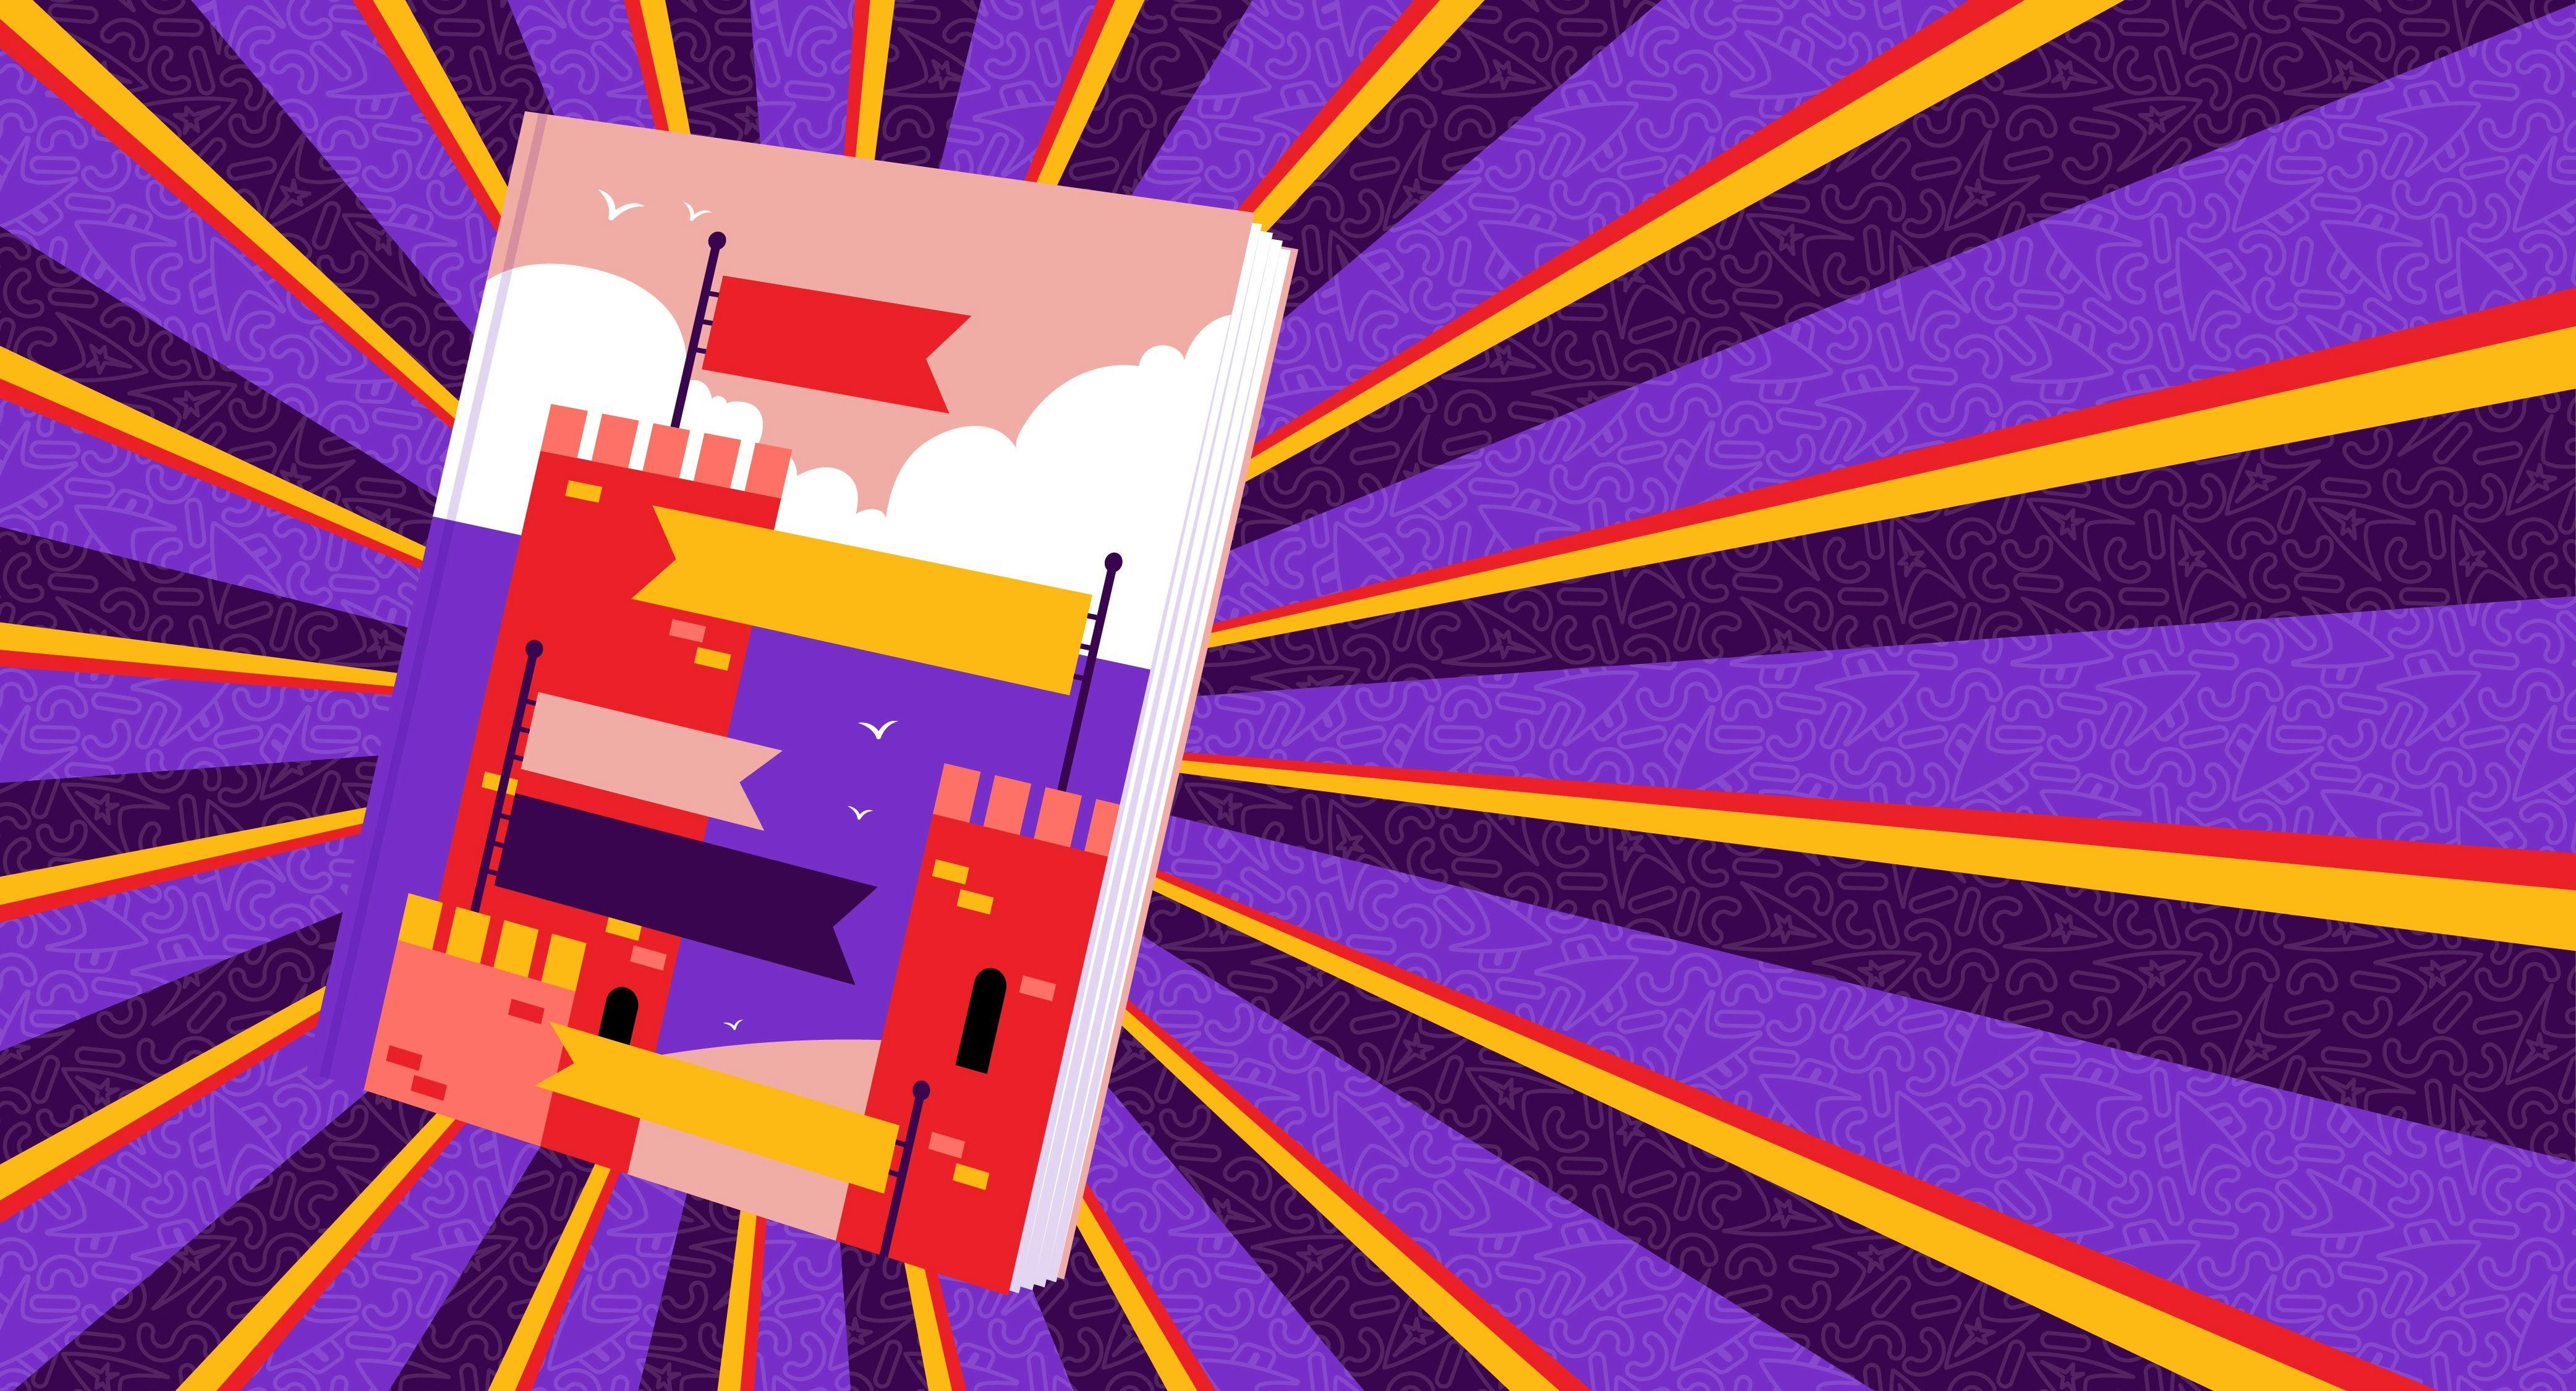 A book featuring a castle on the cover floats against a purple, red, and orange background.